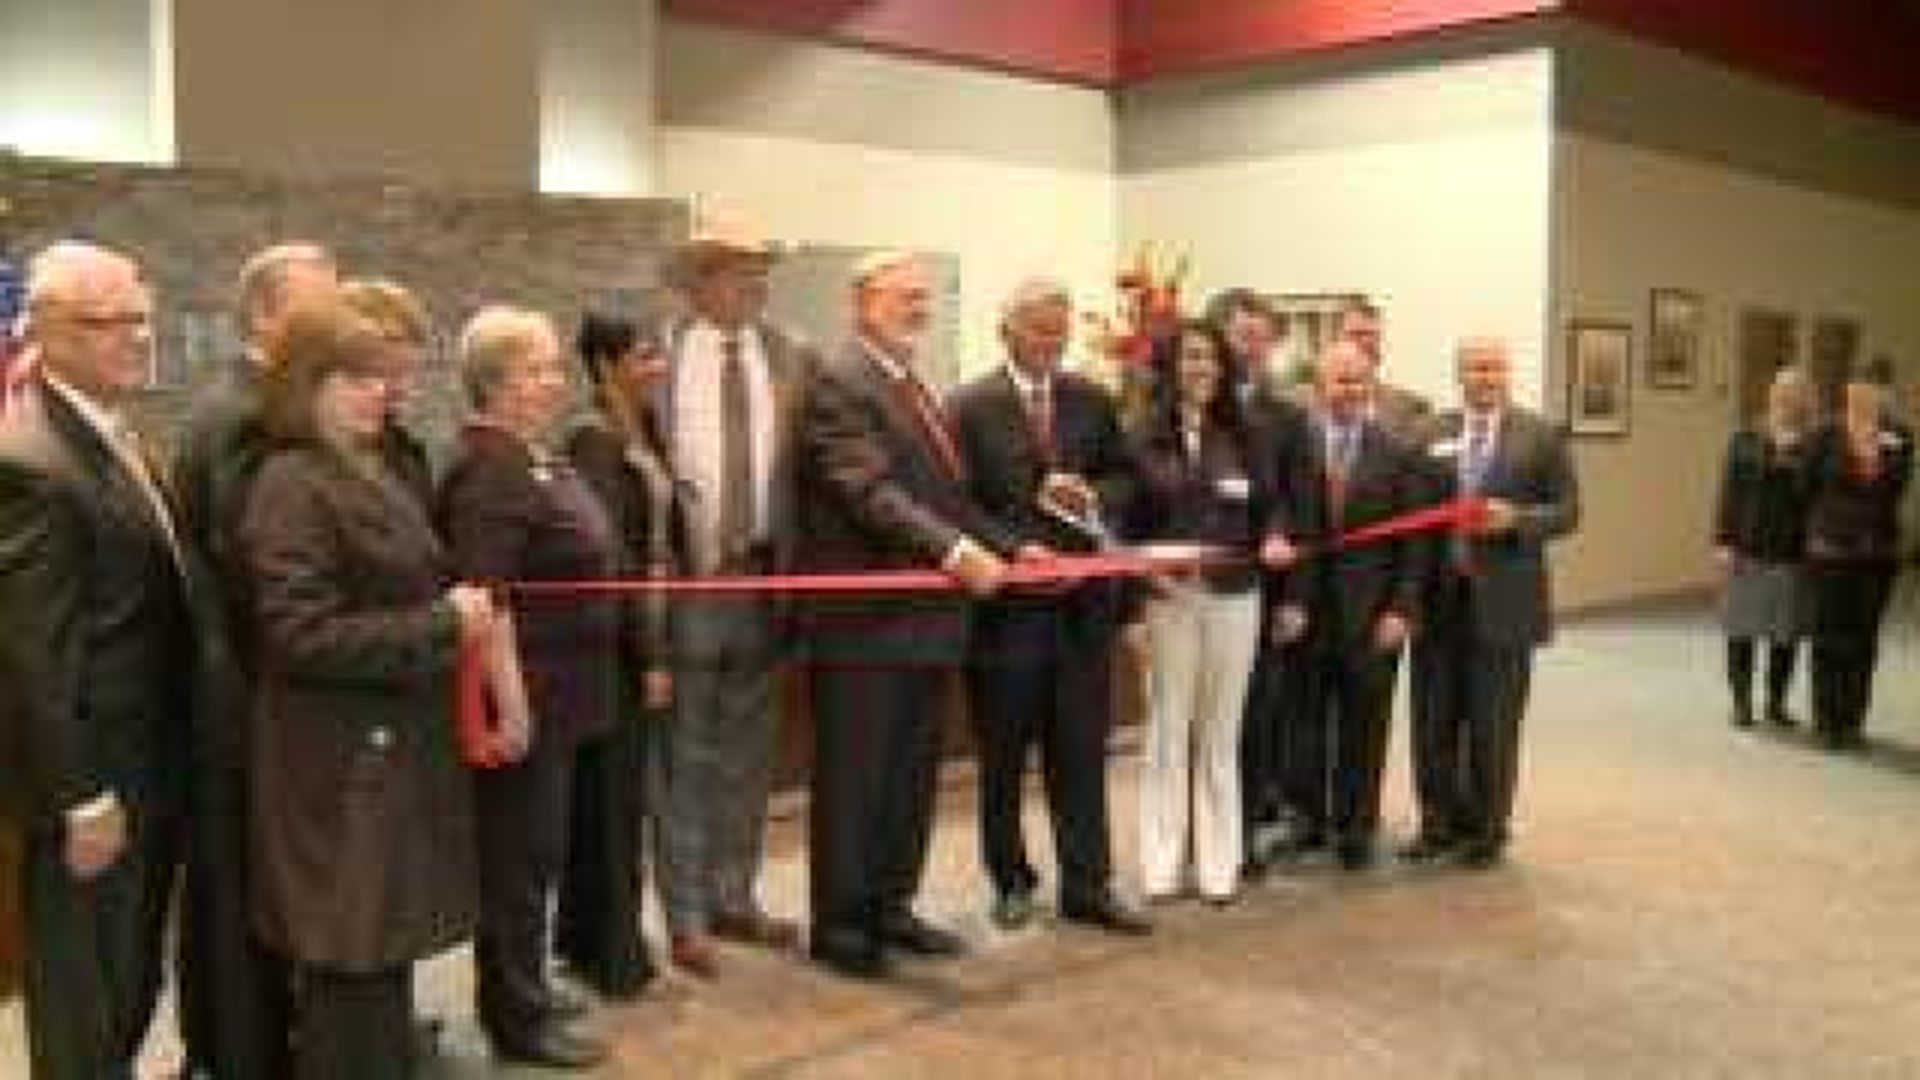 Governor Beebe Visits Fort Smith